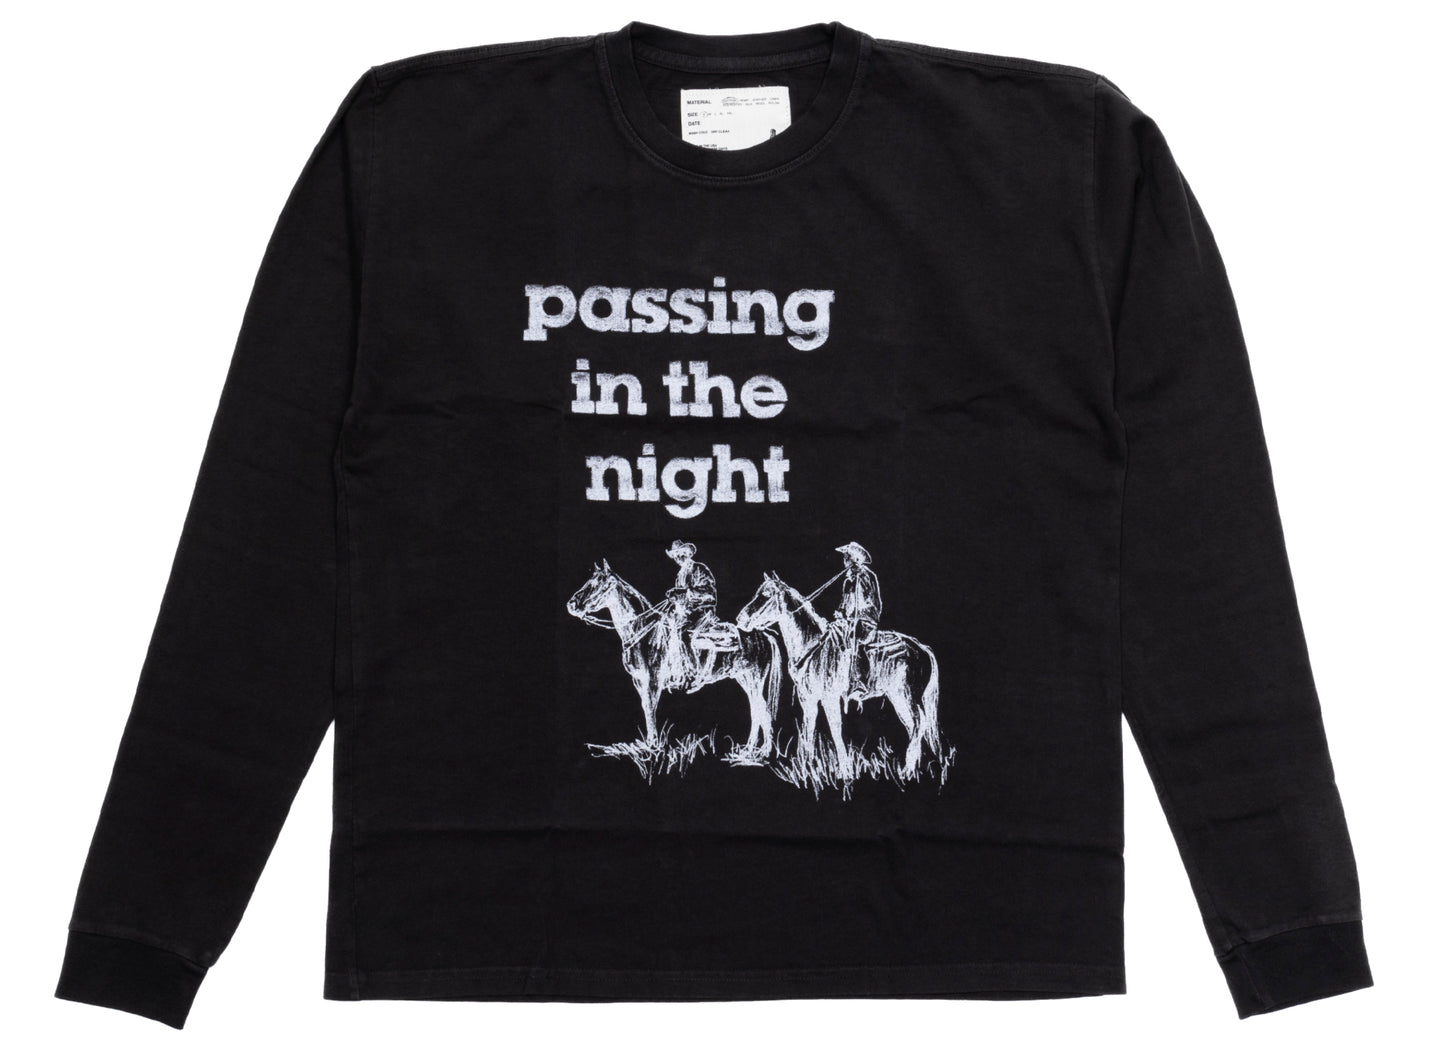 One of These Days Passing in the Night L/S Tee